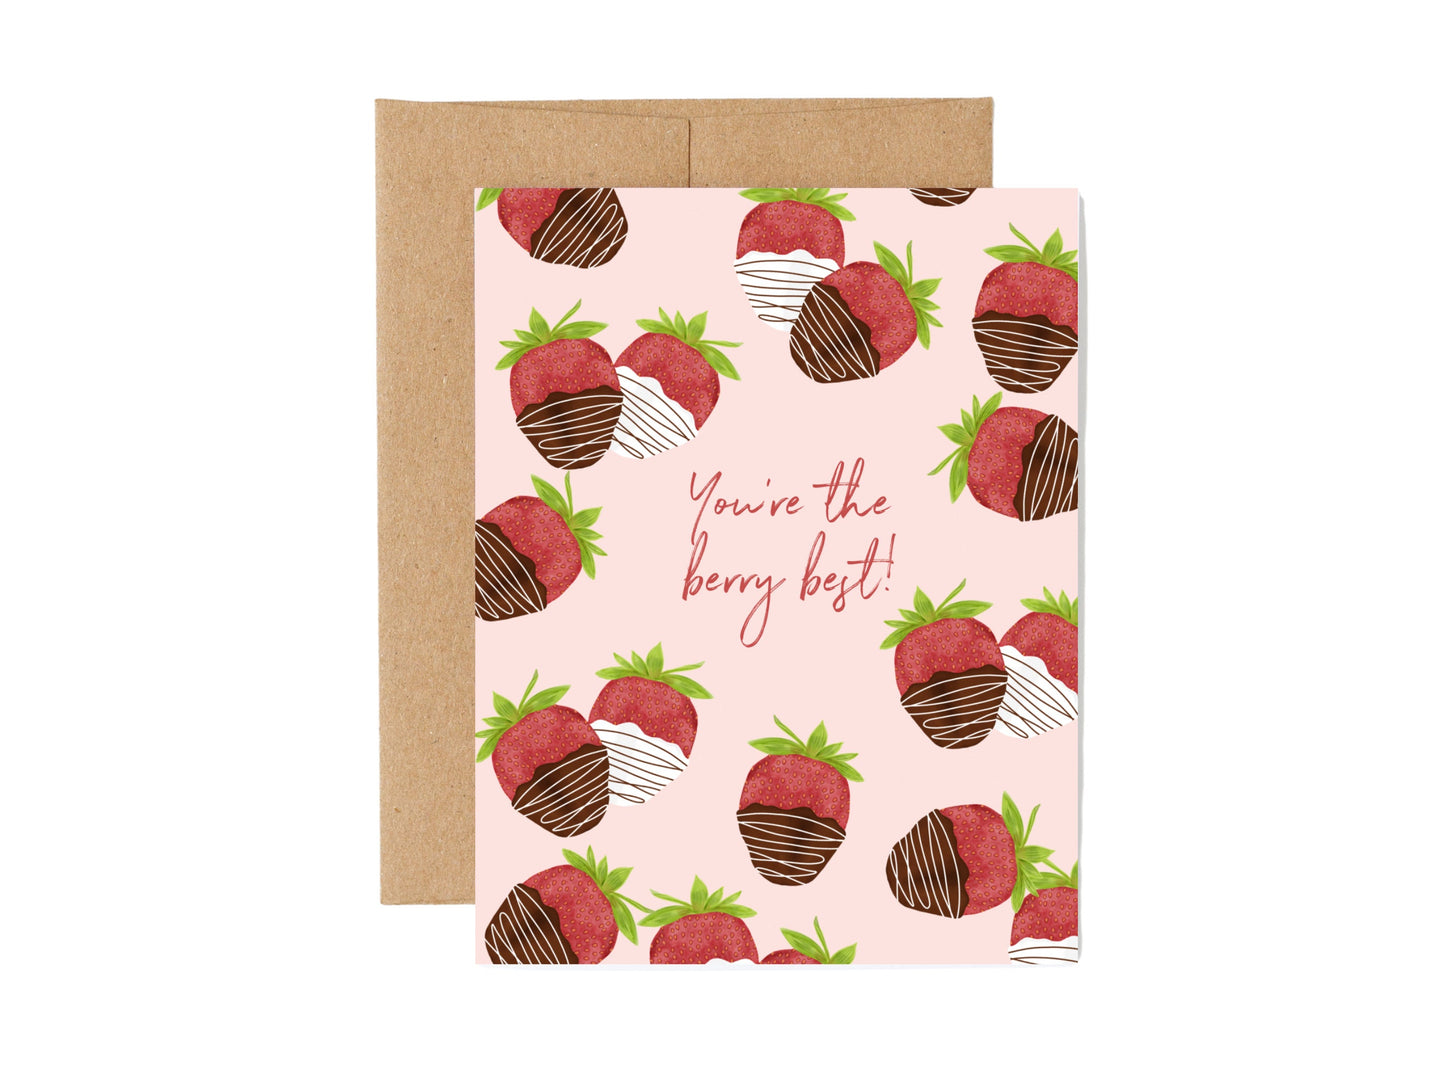 Punny Greeting Card, Chocolate Covered Strawberries, Pun Card, Punny Card, Wedding Card